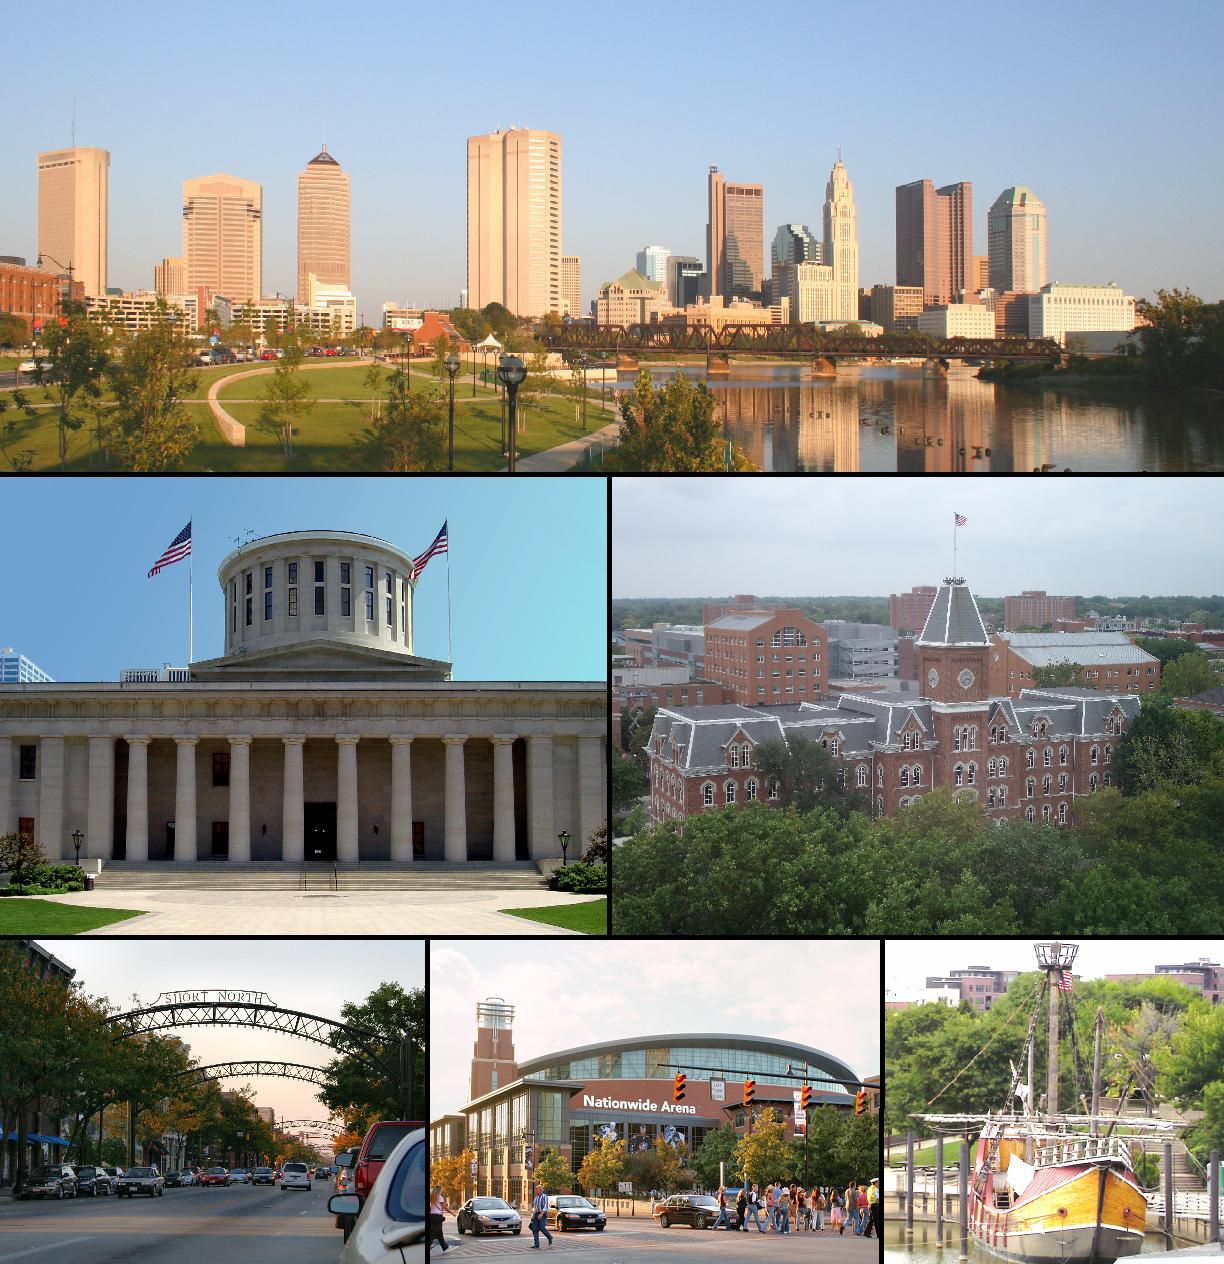 Visiting Columbus? Here’s 5 Things You Should See